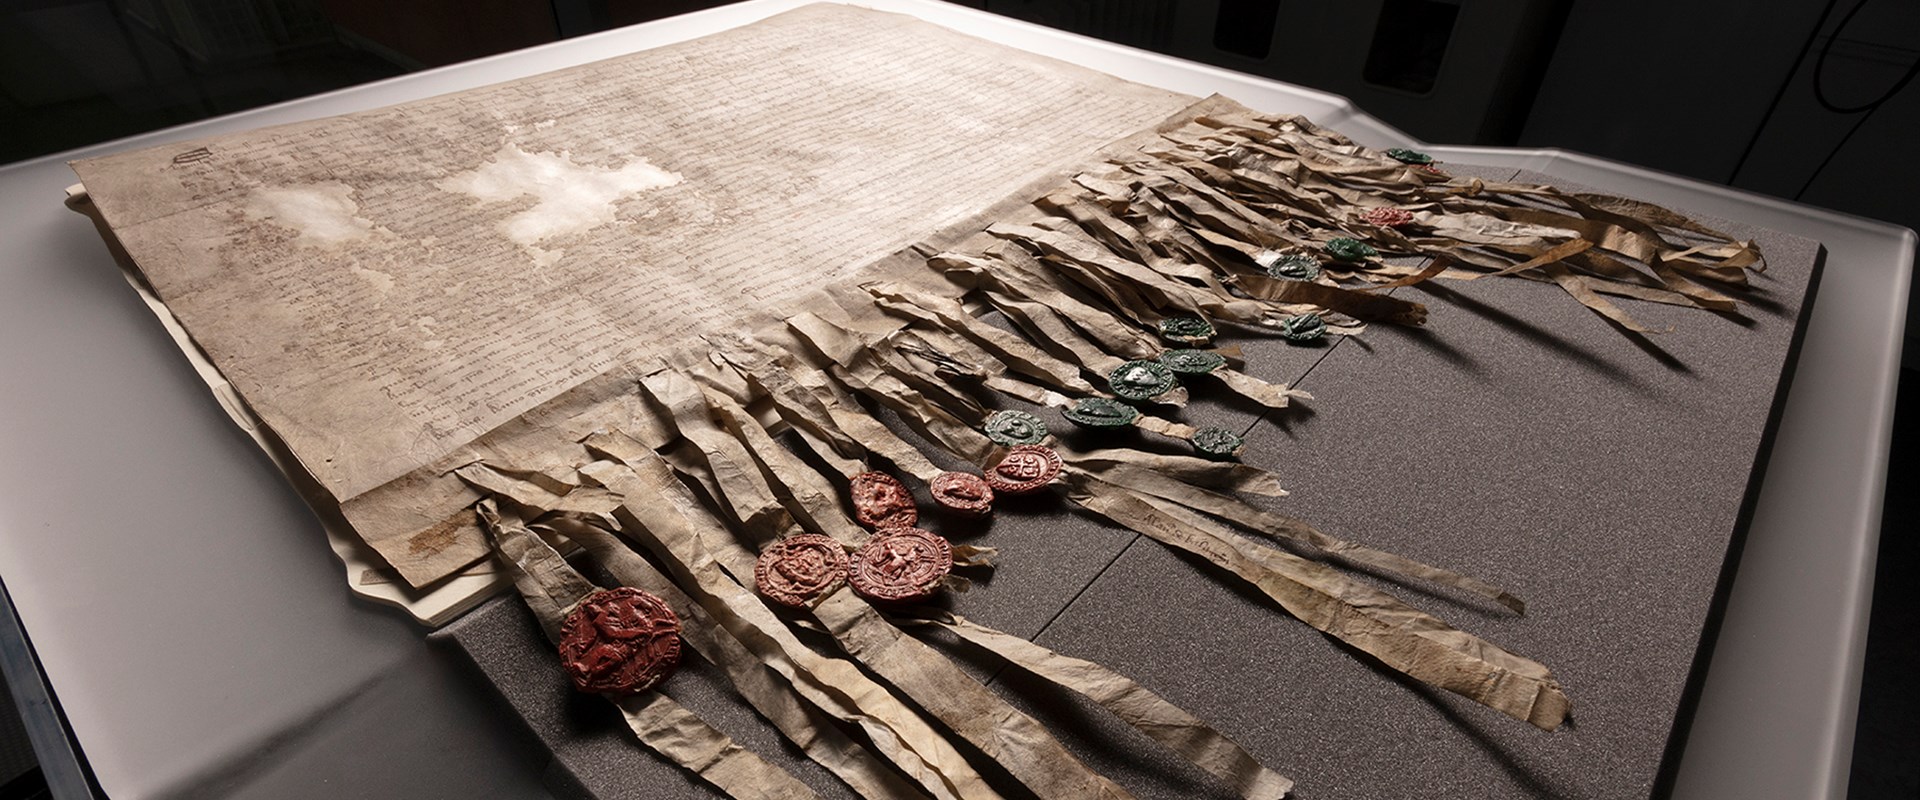 The Declaration of Arbroath laid out on a grey foam protective base set against a black background. The Declaration has dense Latin script across it with two small patches missing, and many strips dangling from the bottom affixed with green and red wax seals.